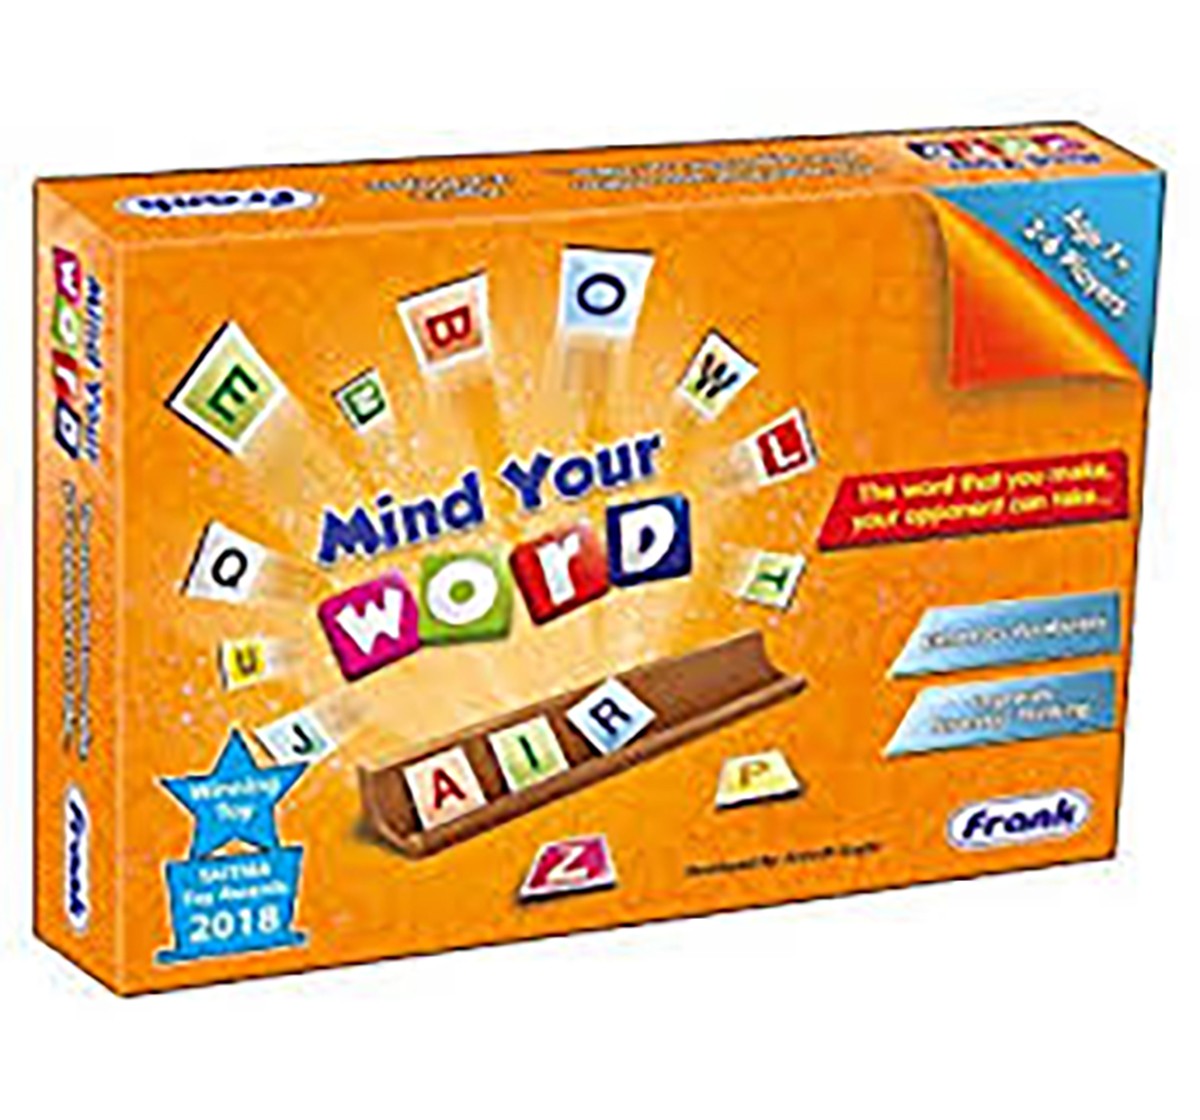  Frank Mind Your Word Game  Puzzles for Kids age 7Y+ 